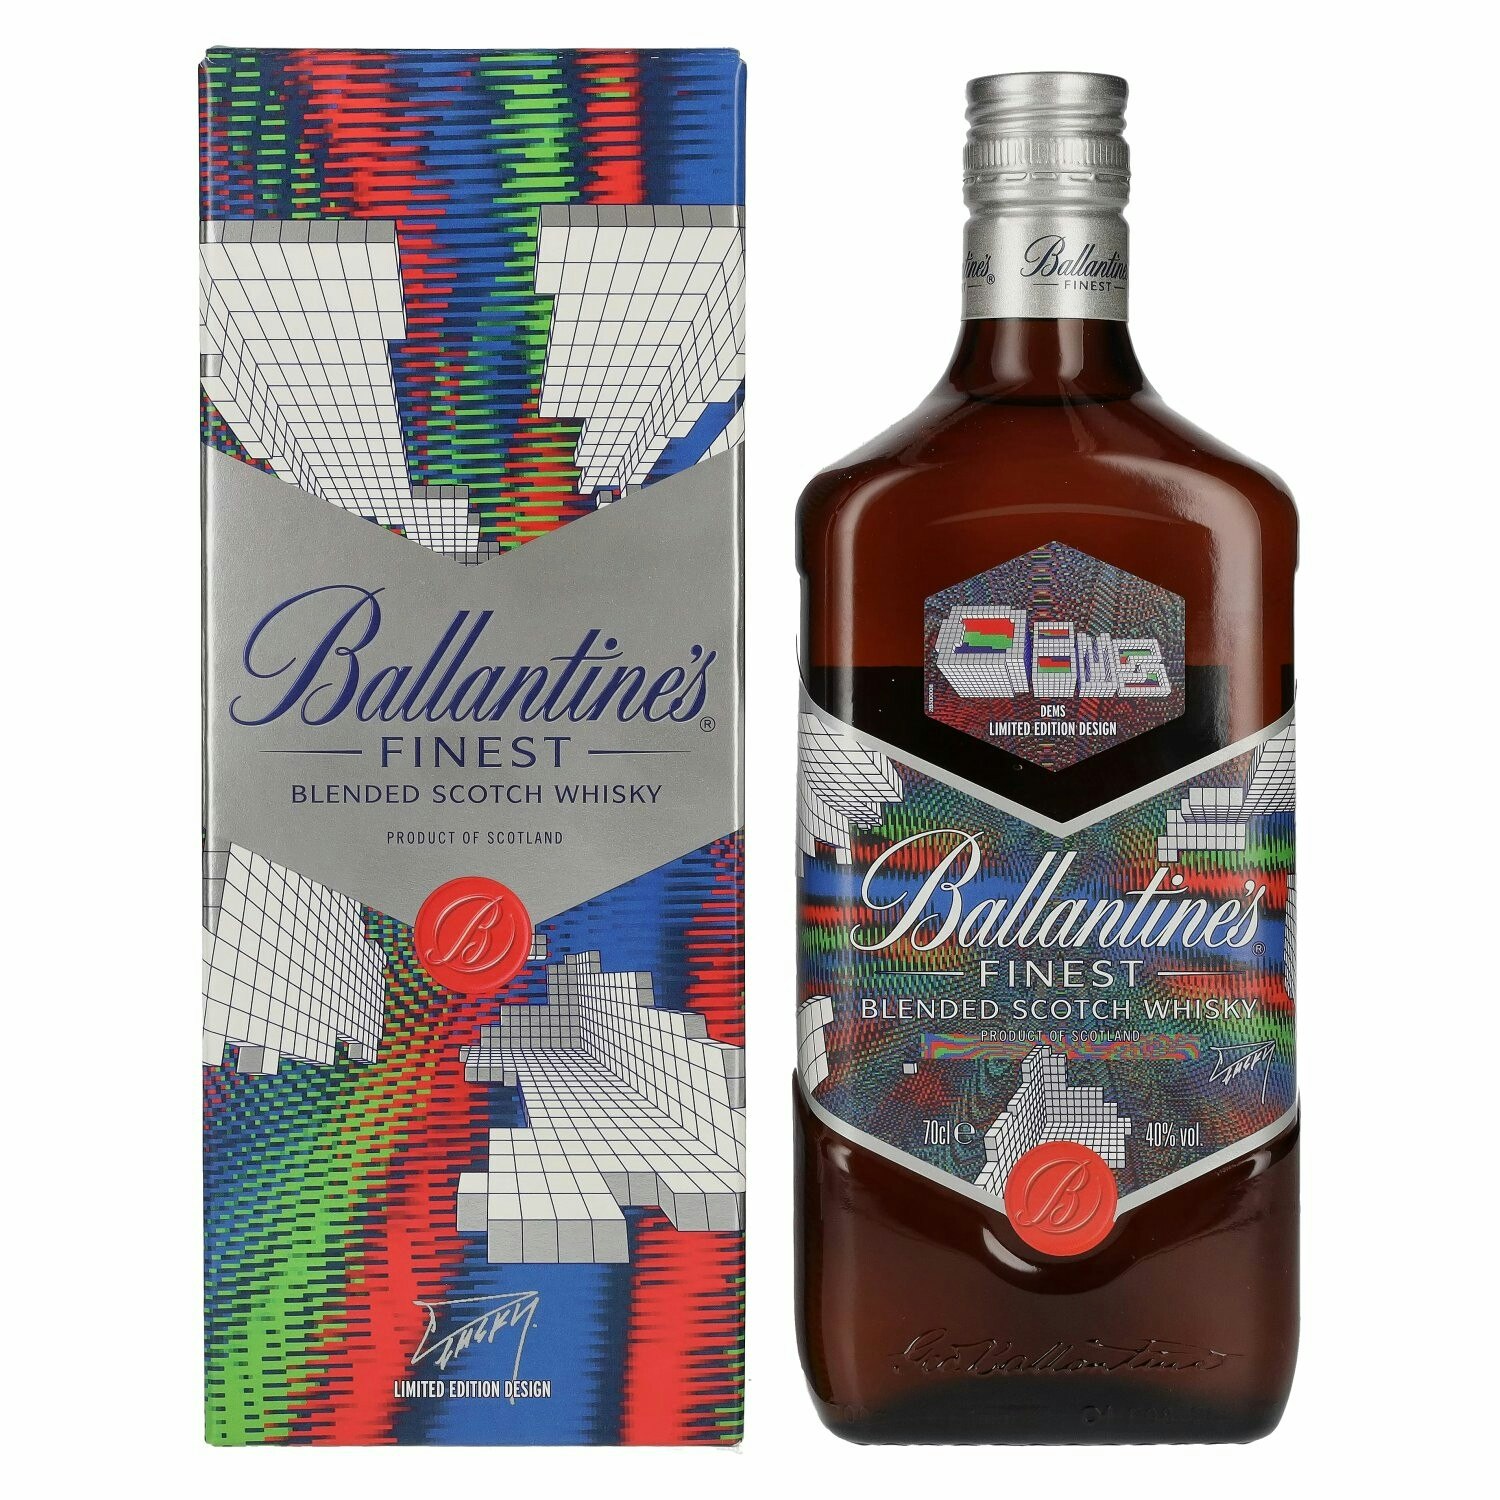 Ballantine's FINEST Blended Scotch Whisky by J. DEMSKY 40% Vol. 0,7l in Giftbox